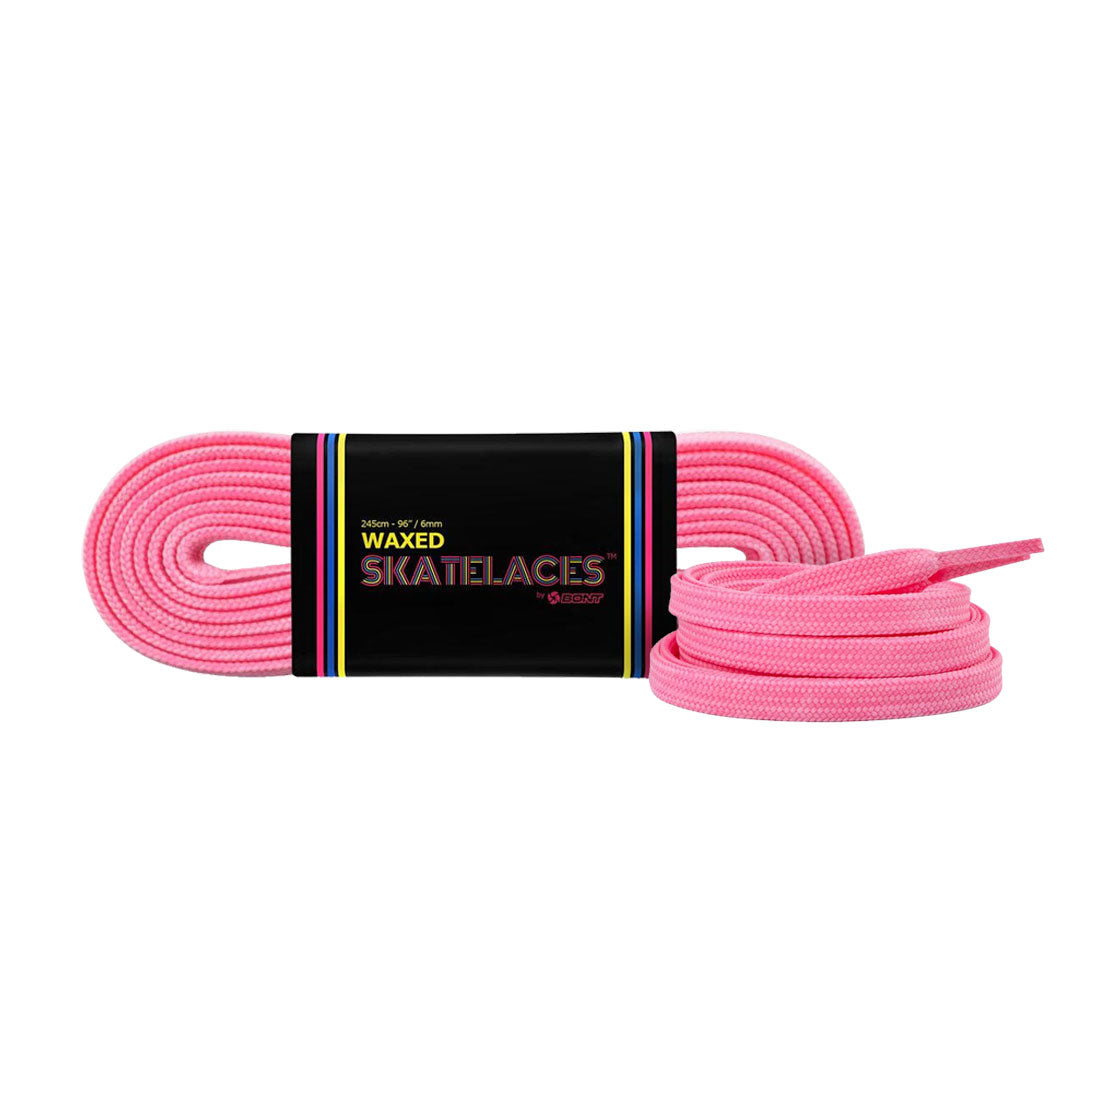 Bont Waxed 6mm Laces - 275cm/108in Cosmo Pink Laces